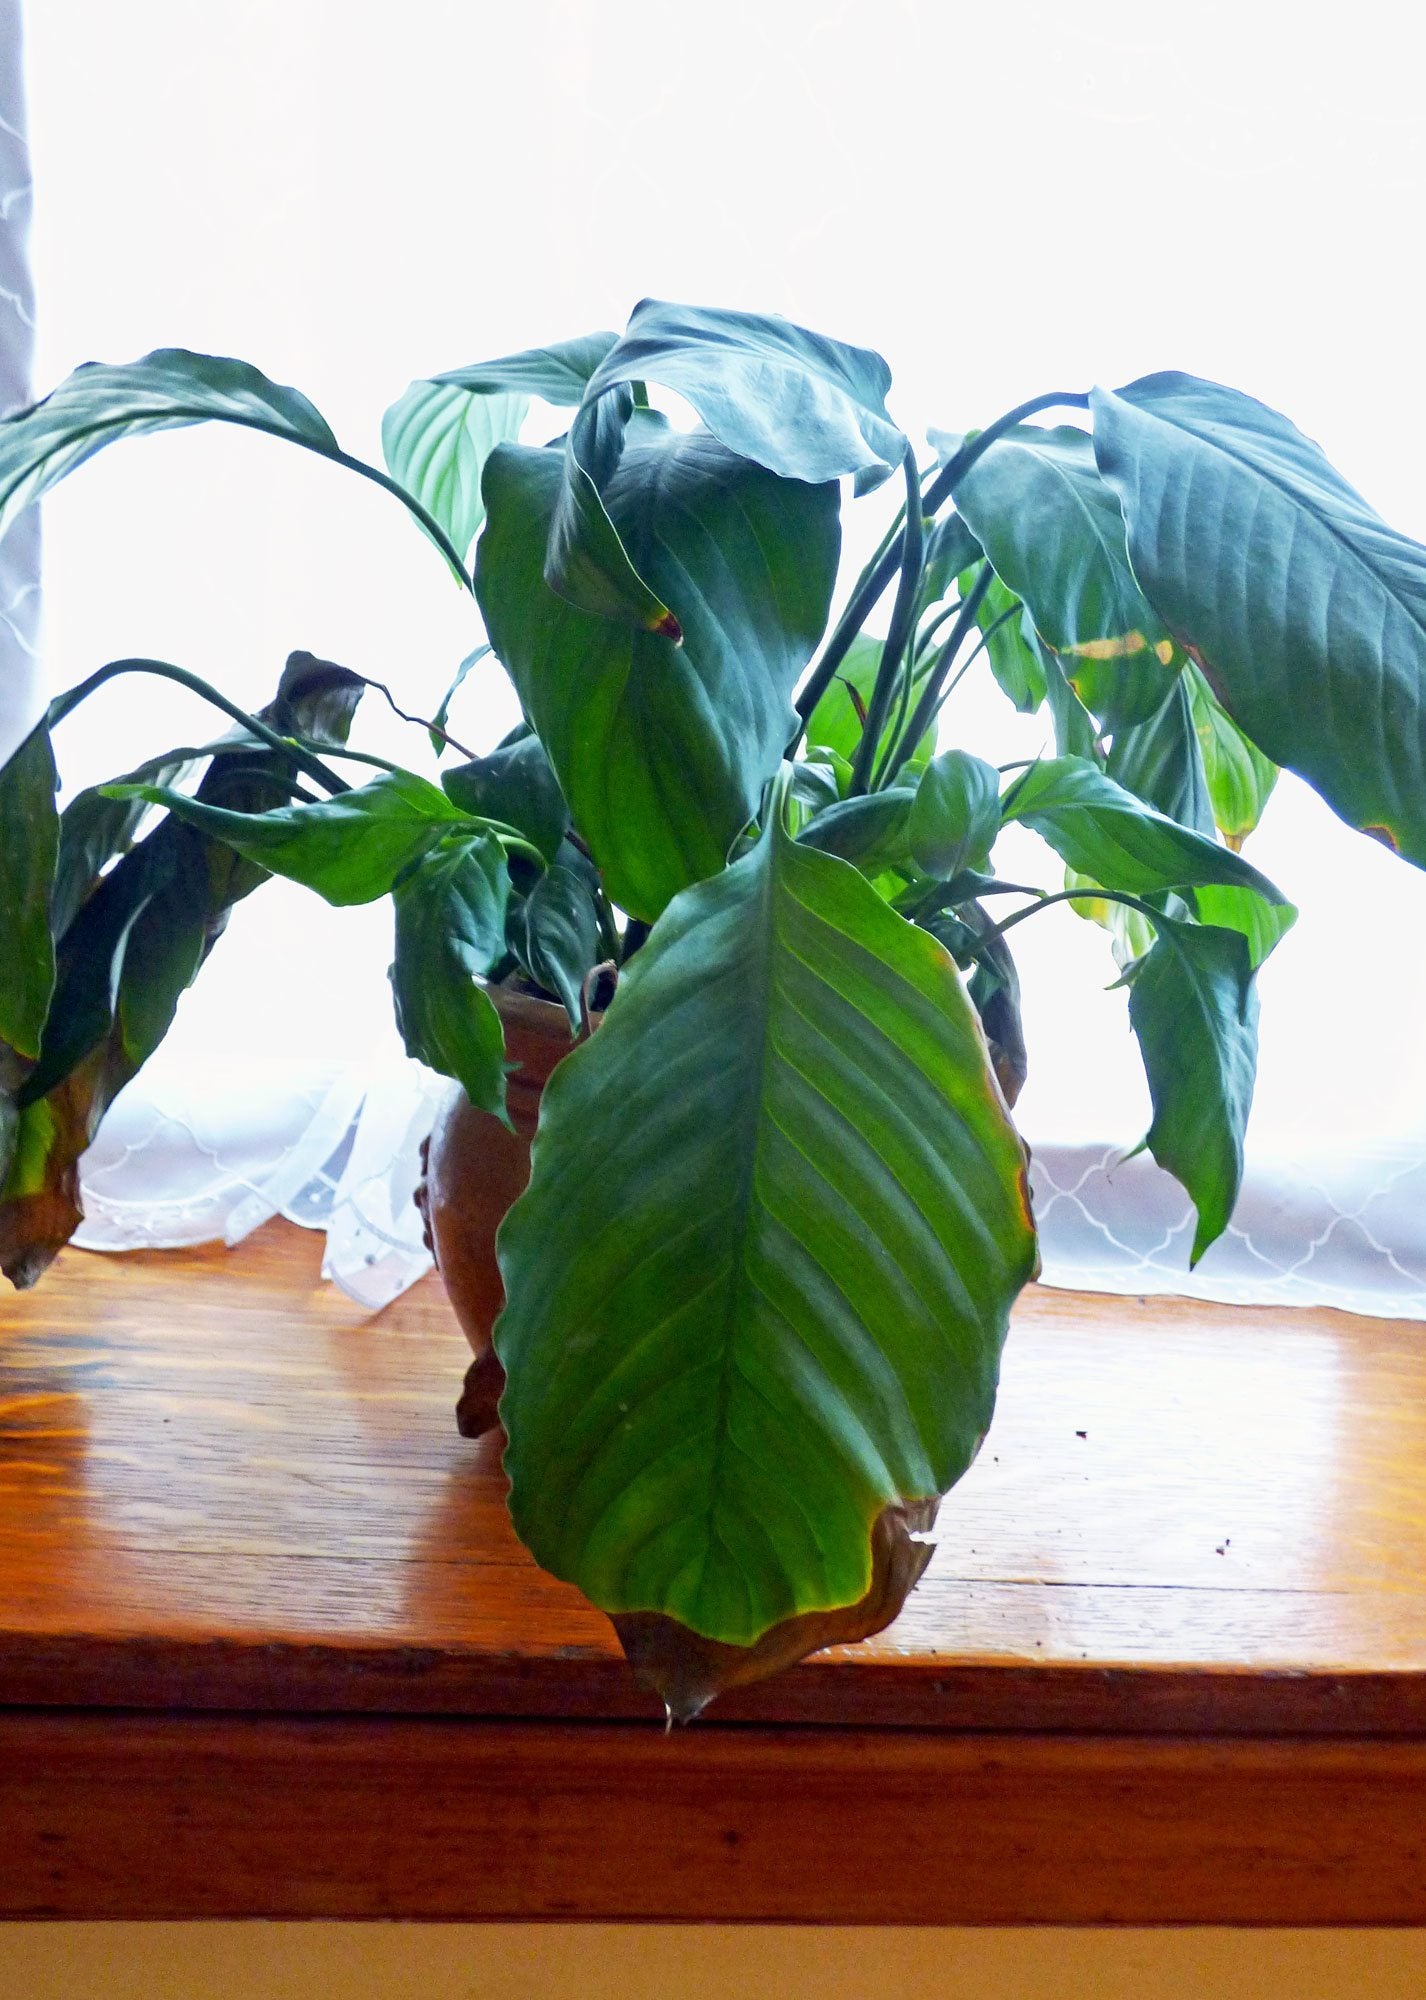 Peace Lily With Brown Tips: Causes Of Brown Tips On Peace Lily Leaves